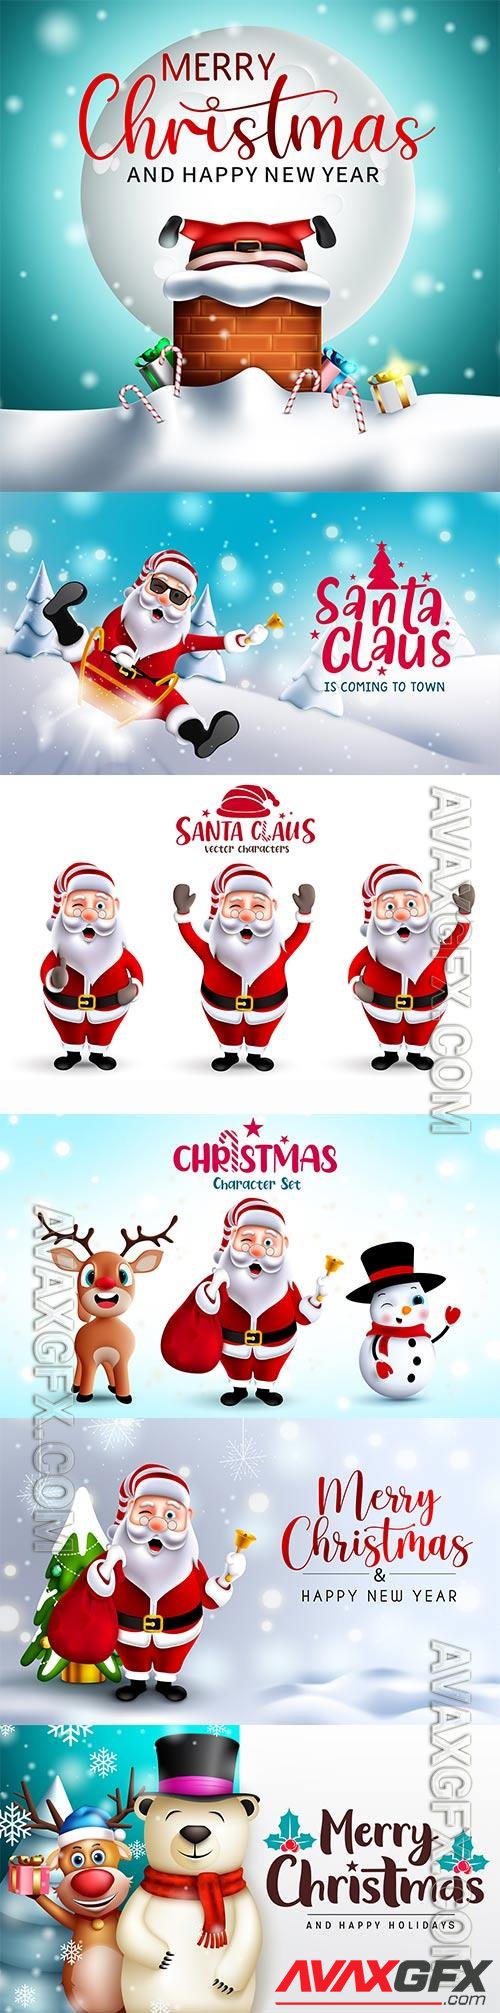 Merry christmas greeting vector background merry christmas with Santa